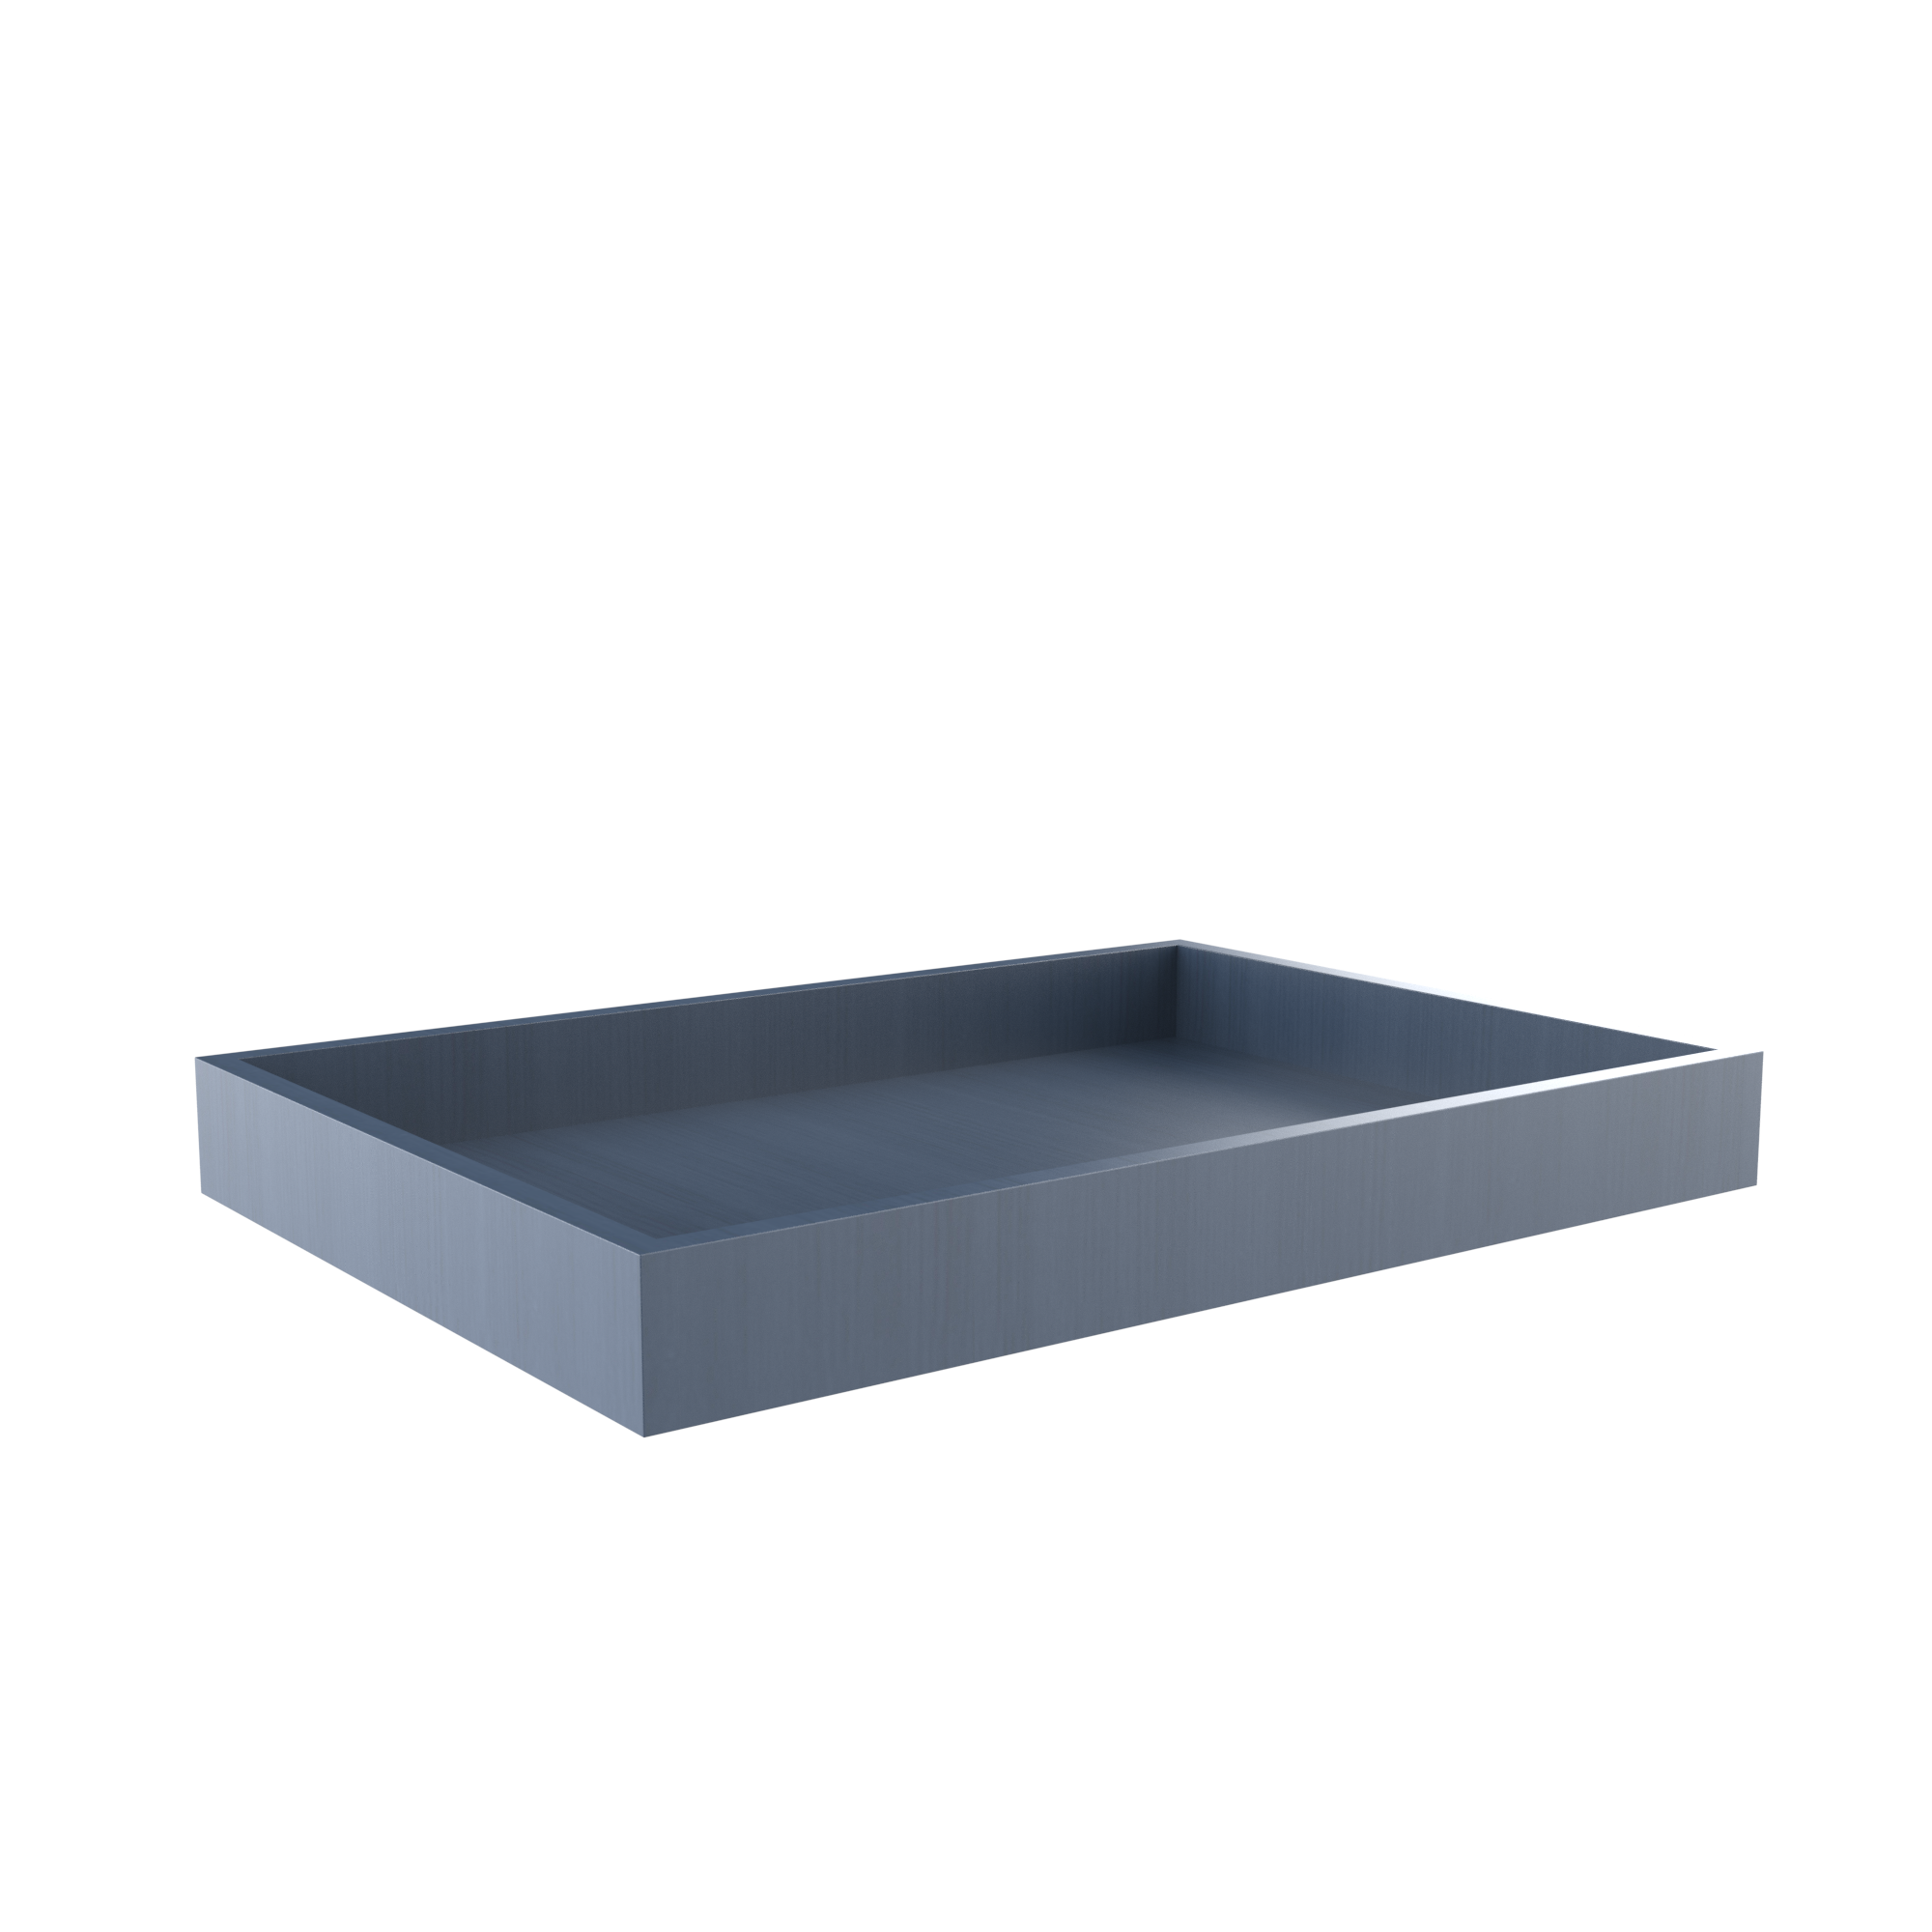 Roll Out Tray for Cabinets - Fits B30 - Blue Shaker Cabinet Cabinet